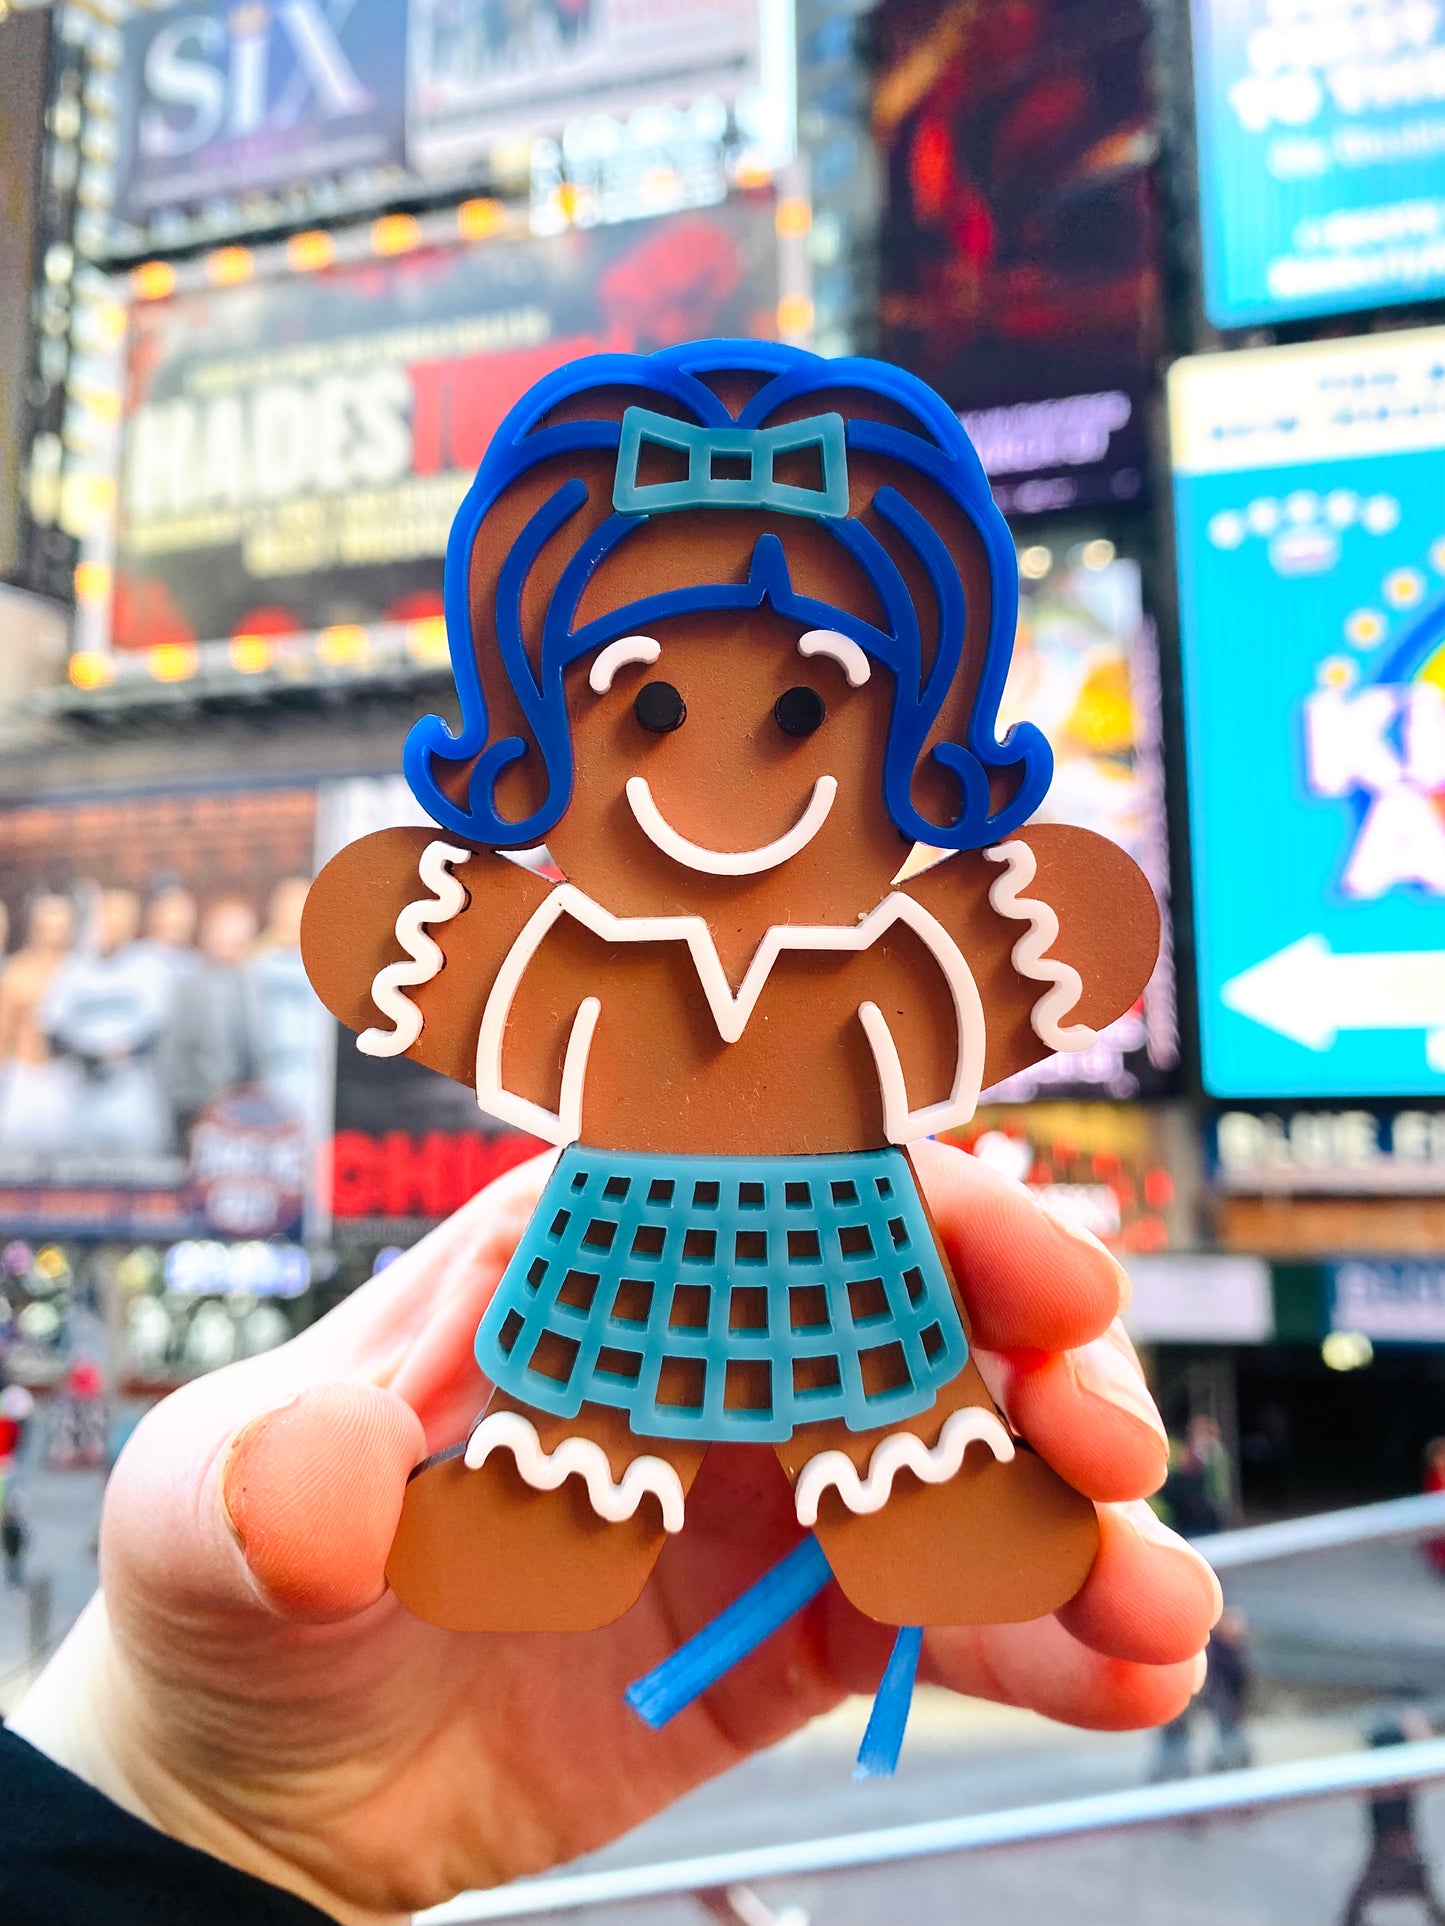 Gingerbread 60s Baltimore Teen Ornament (2021 Collection)